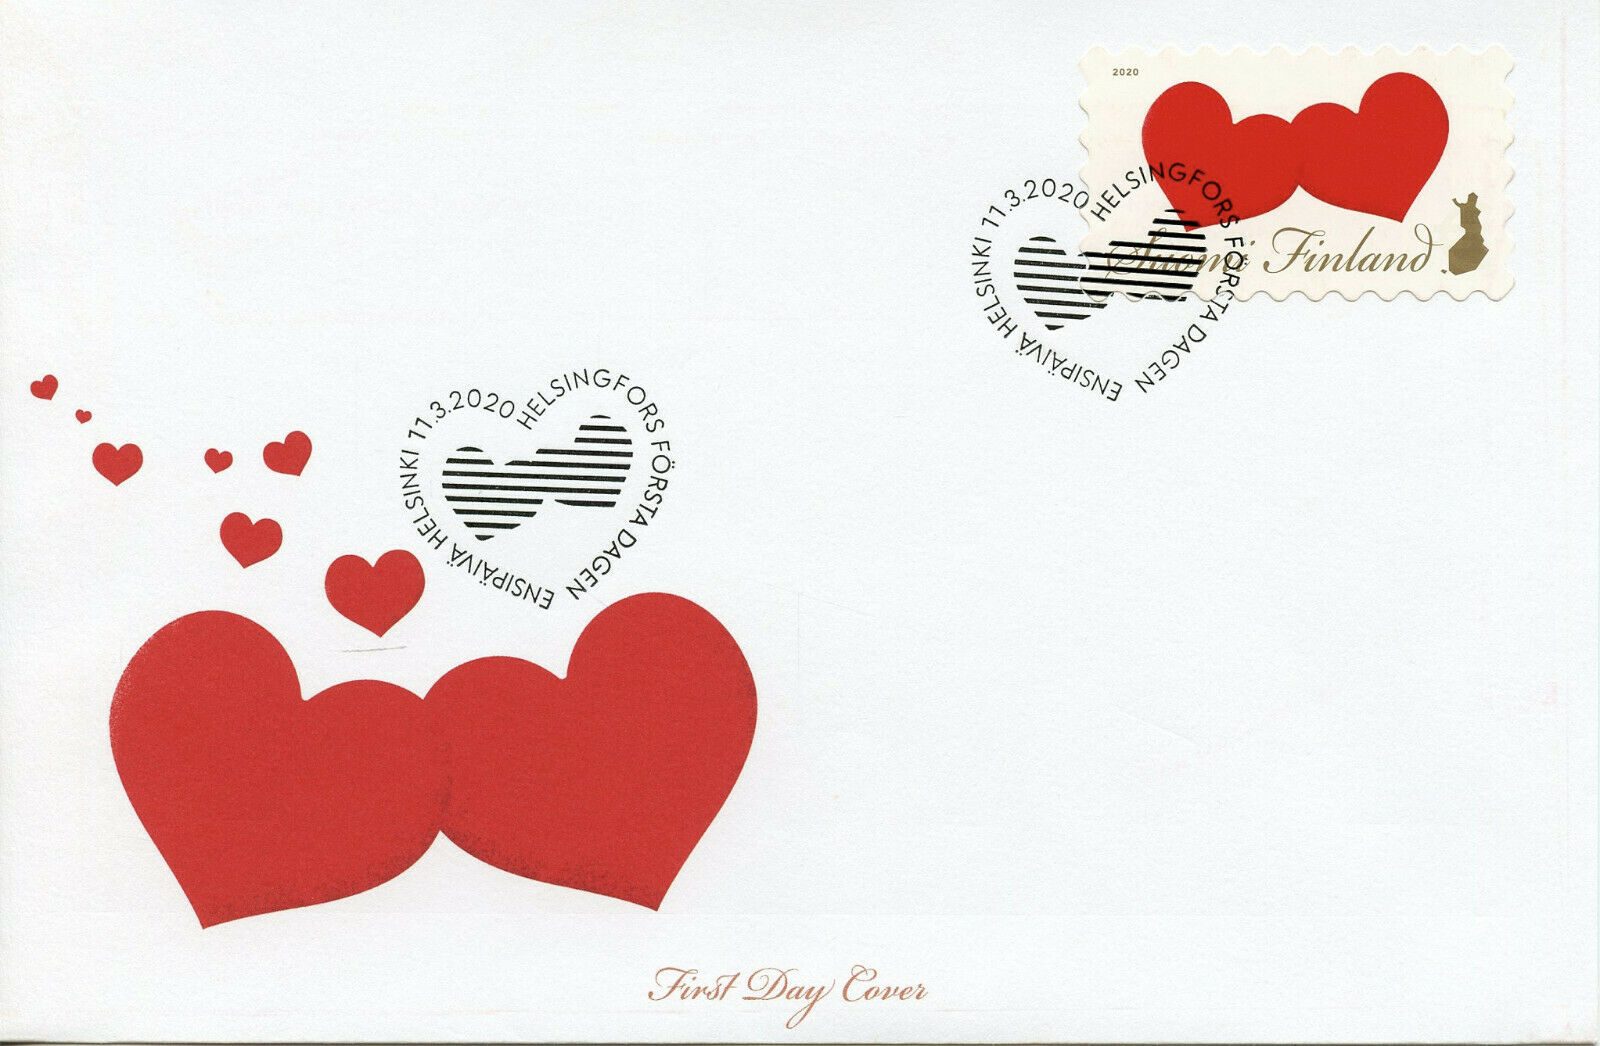 Finland Greetings Stamps 2020 FDC Two Hearts 1v S/A Set